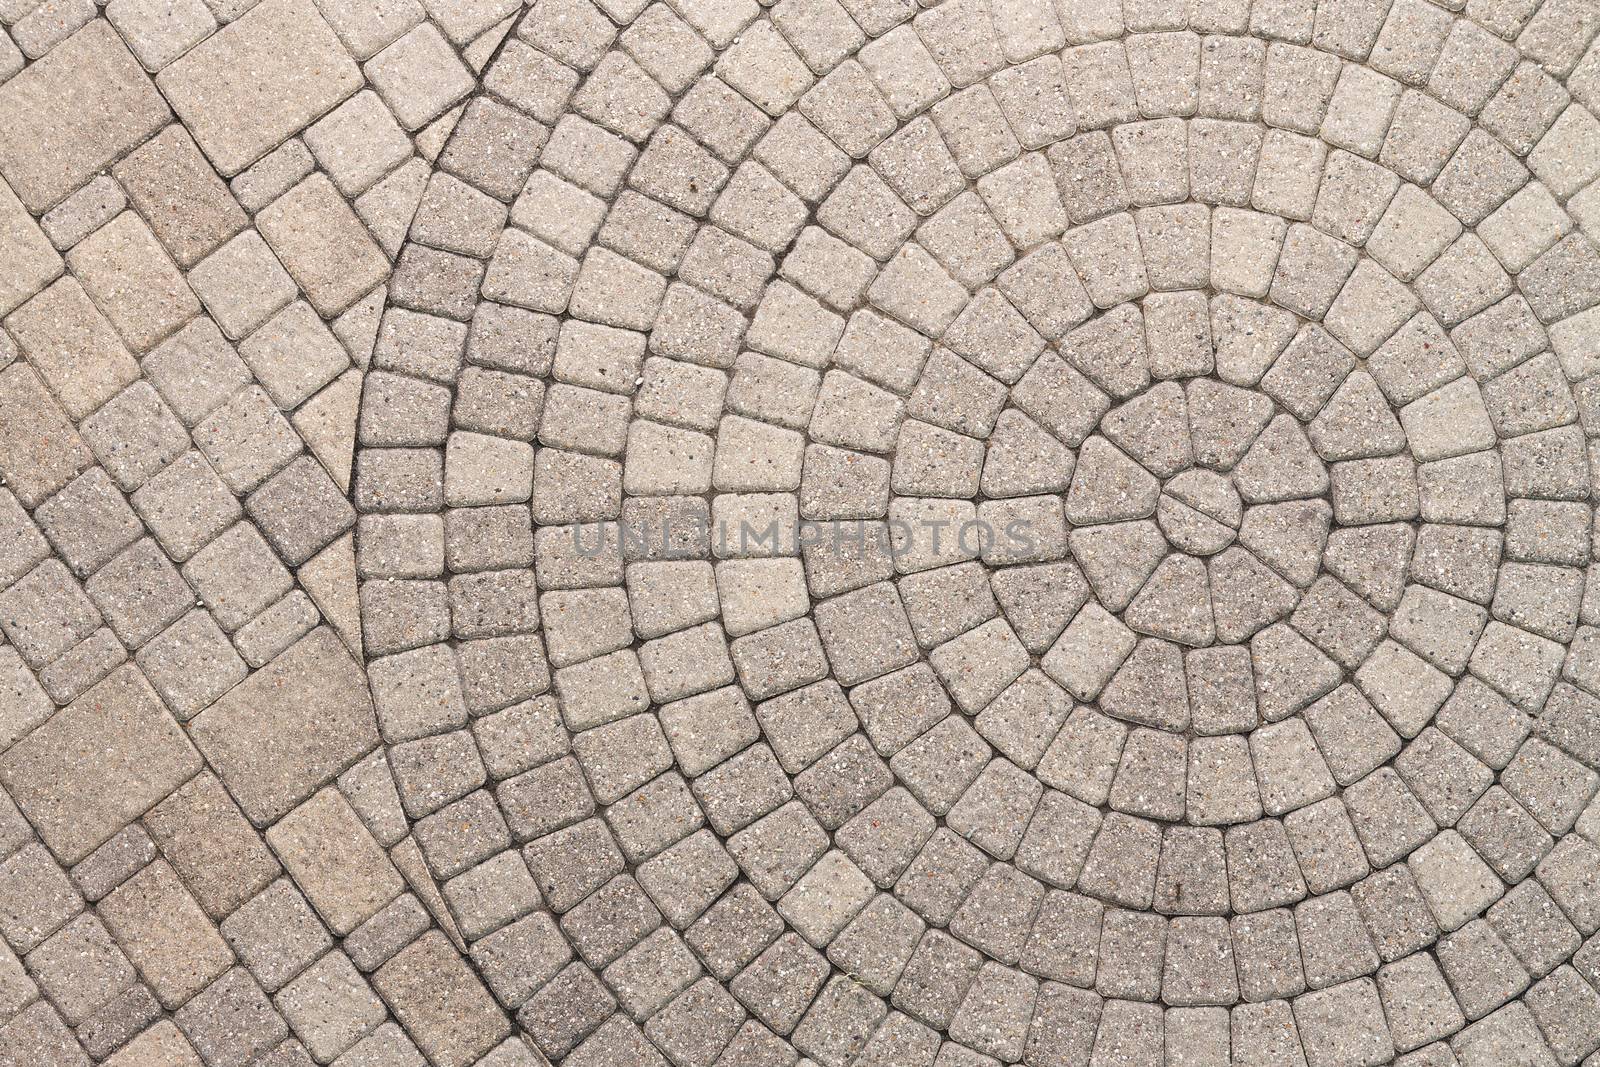 Paver bricks arranged in a circular pattern of concentric geometric circles. Architectural background of an ornamental pattern in outdoor patio paving.